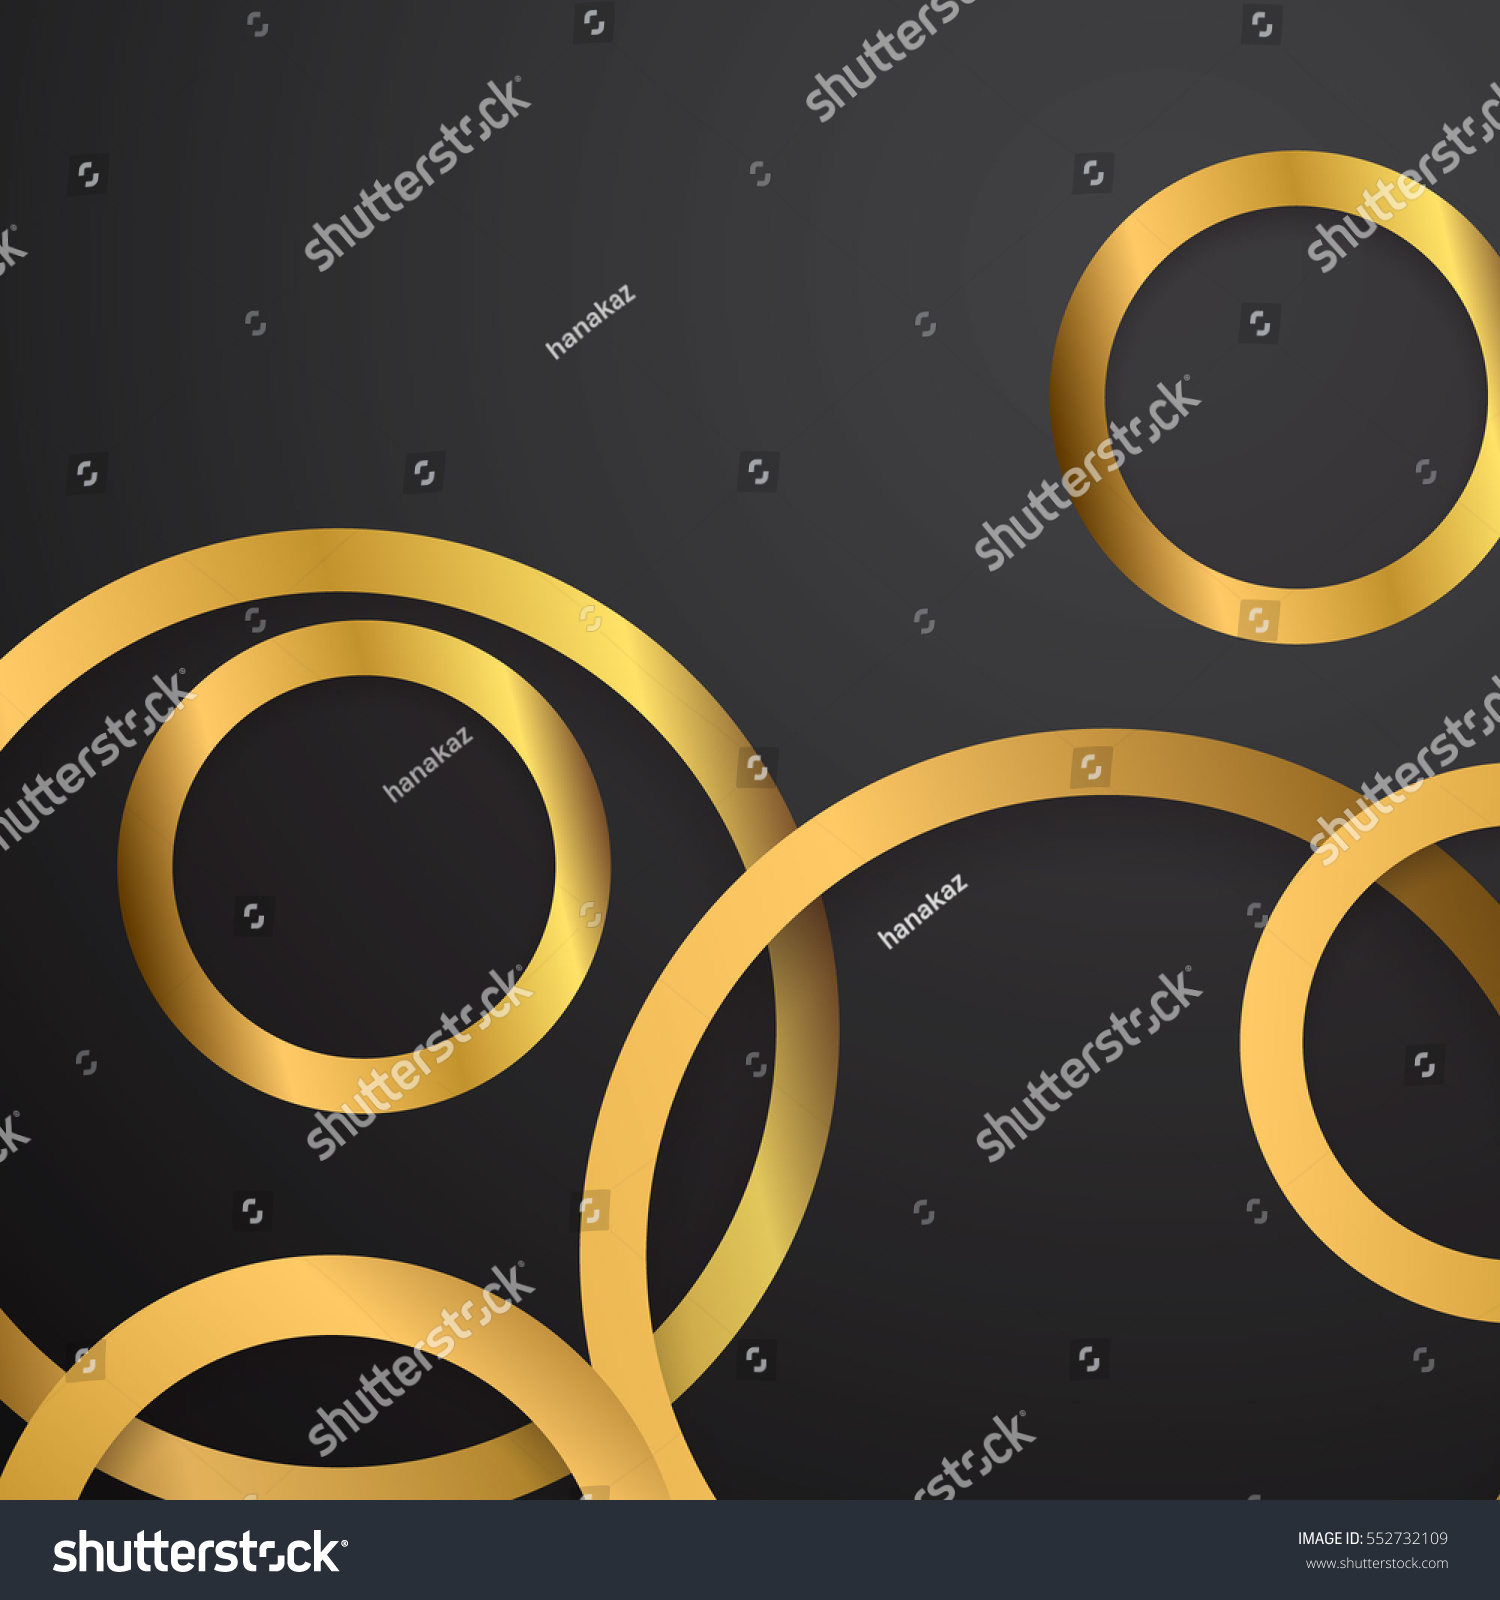 Gold Circle On Dark Background Stock Vector (Royalty Free) 552732109 ...